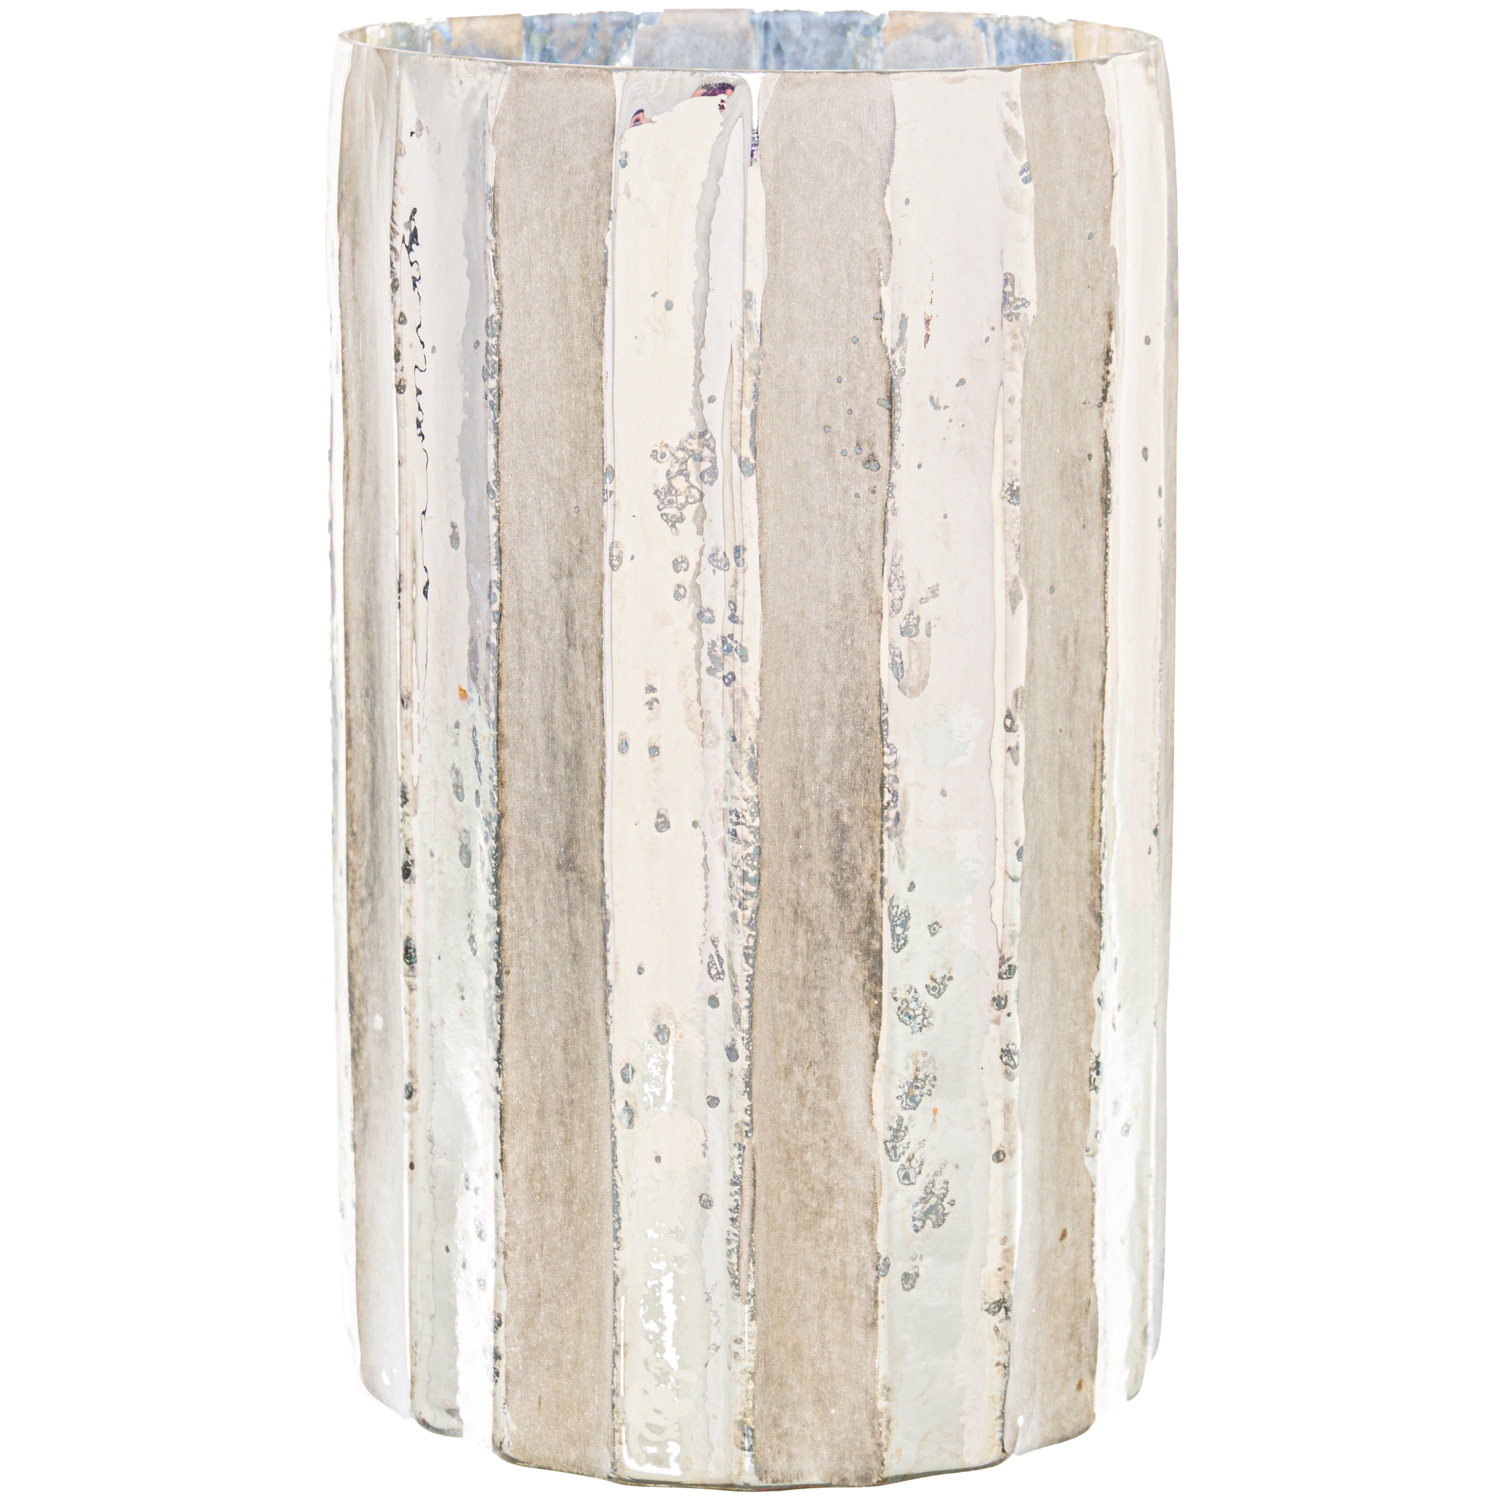 Silver And Grey Striped Candle Holder - Image 1